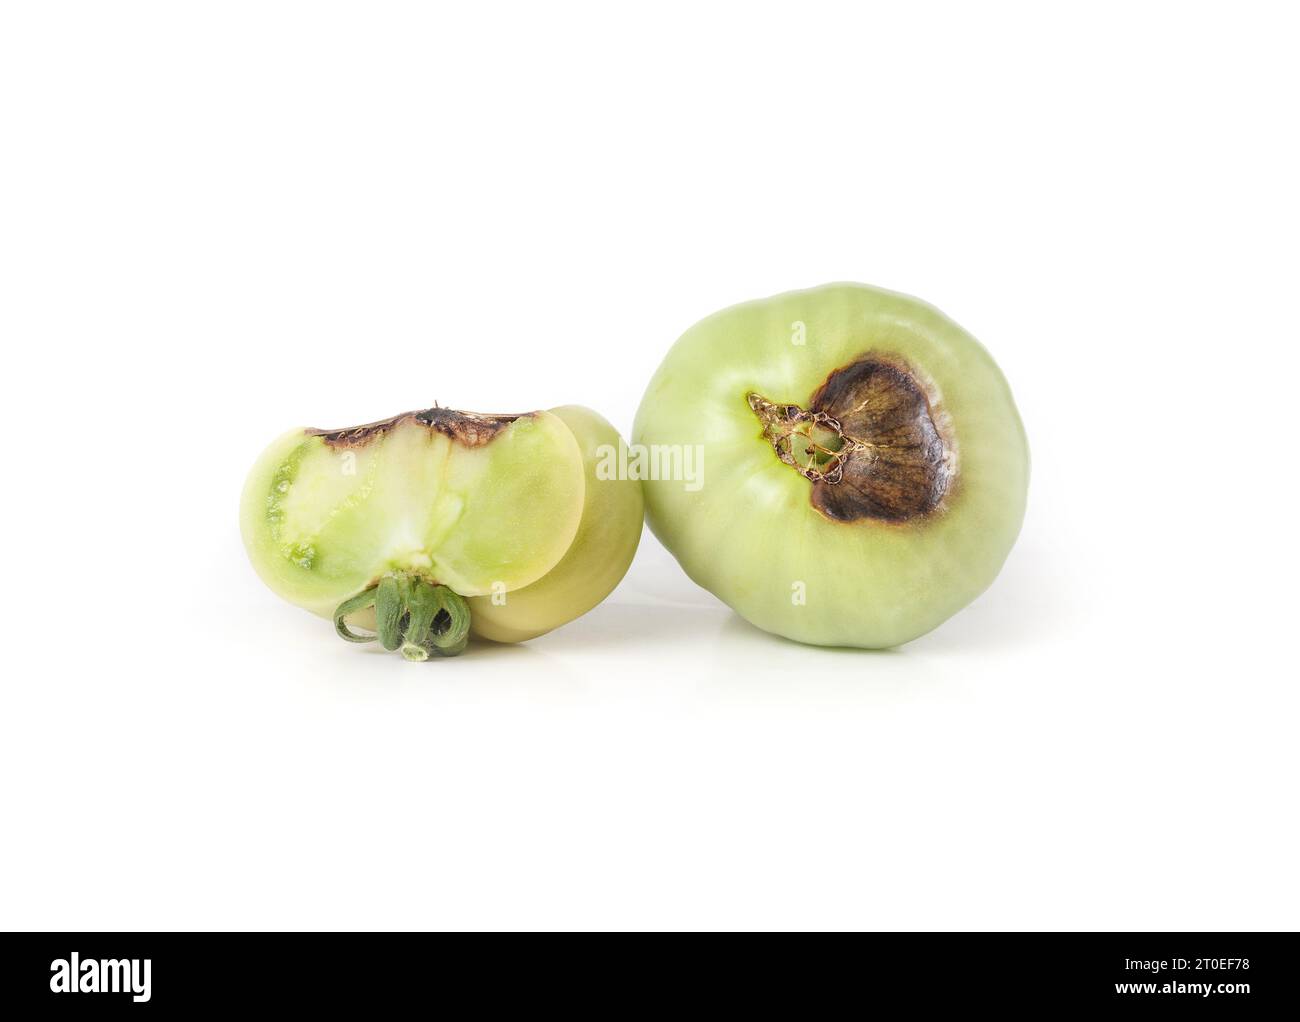 Tomatoes with blossom-end rot. Two unripe green tomato fruits with dark leathery brown spots from a calcium imbalance. Caused by environmental problem Stock Photo